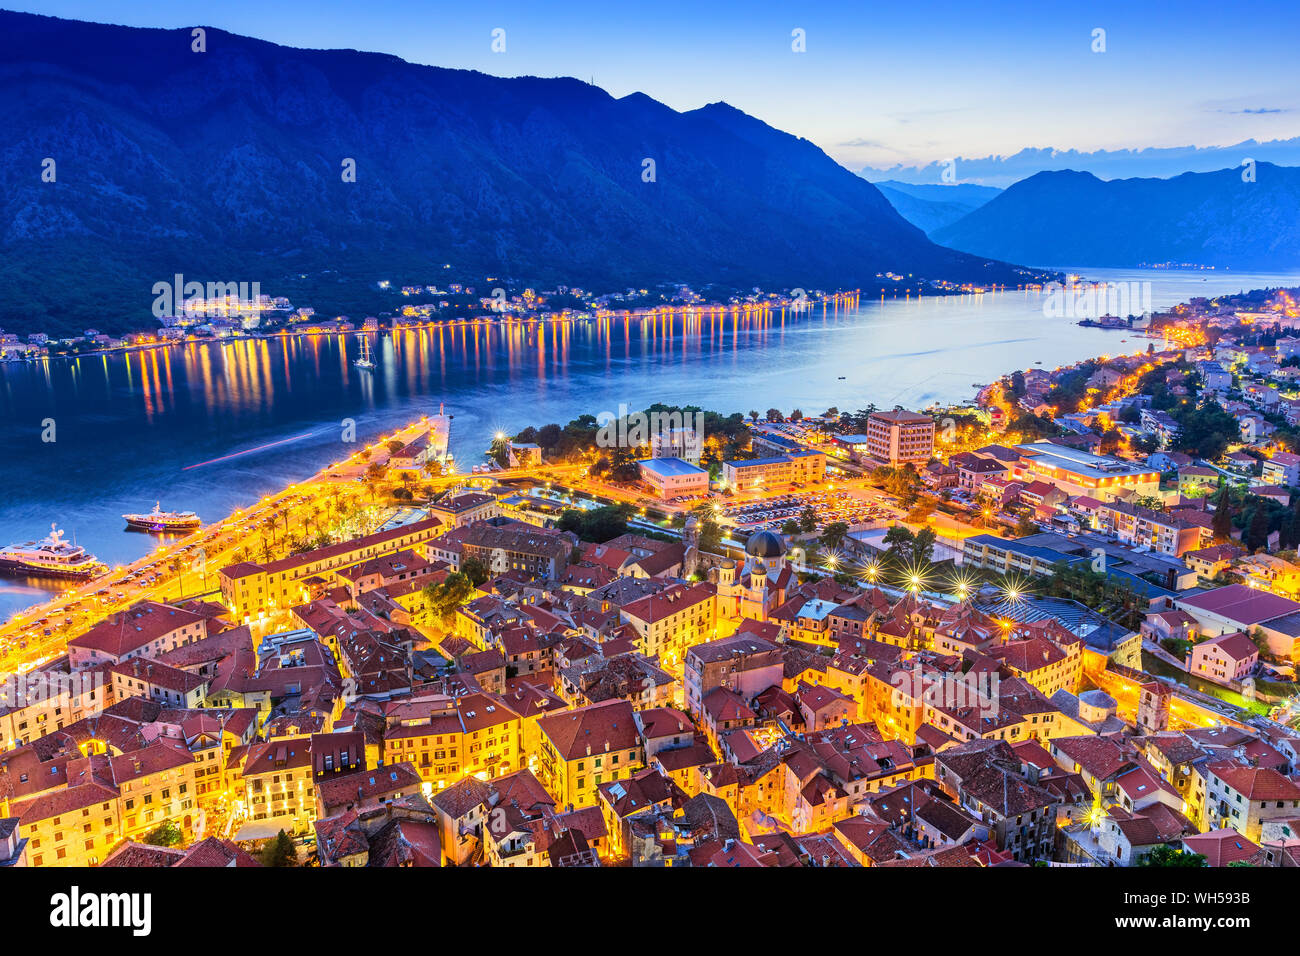 Kotor, Montenegro. Aerial view of Kotor Bay and Old Town at night. Stock Photo